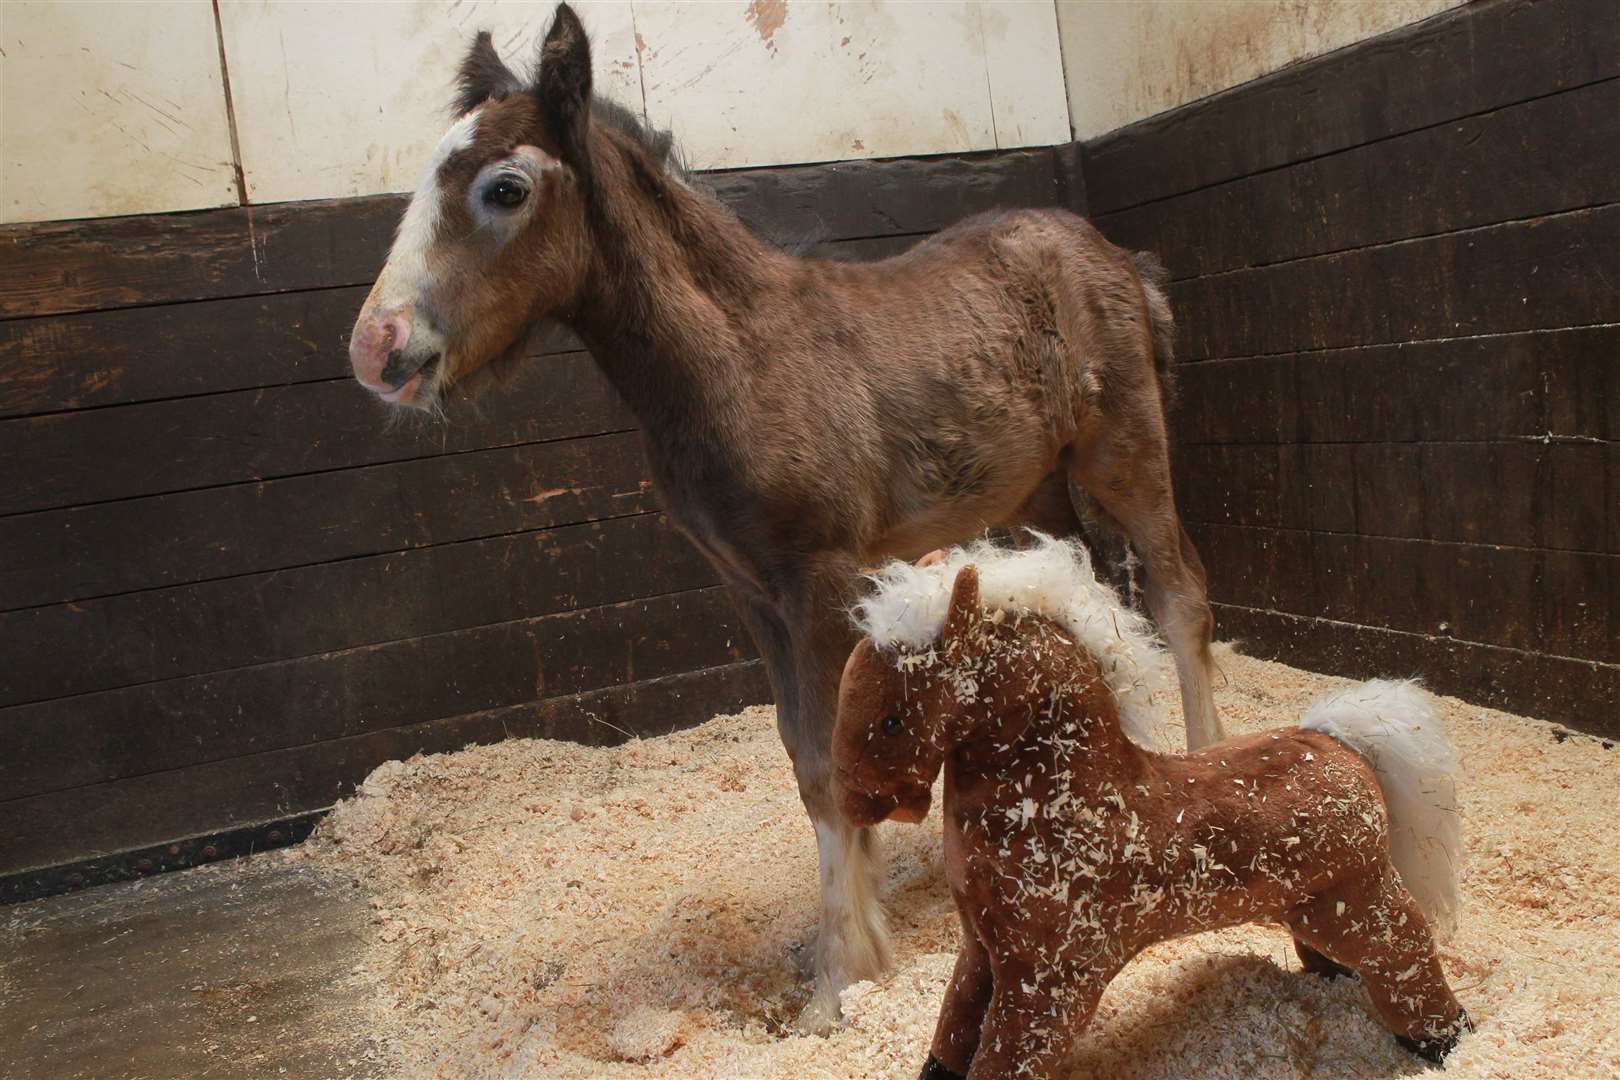 A two week old foal, aptly named "Oli the Orphan" who was dumped on a farm in Collier Street